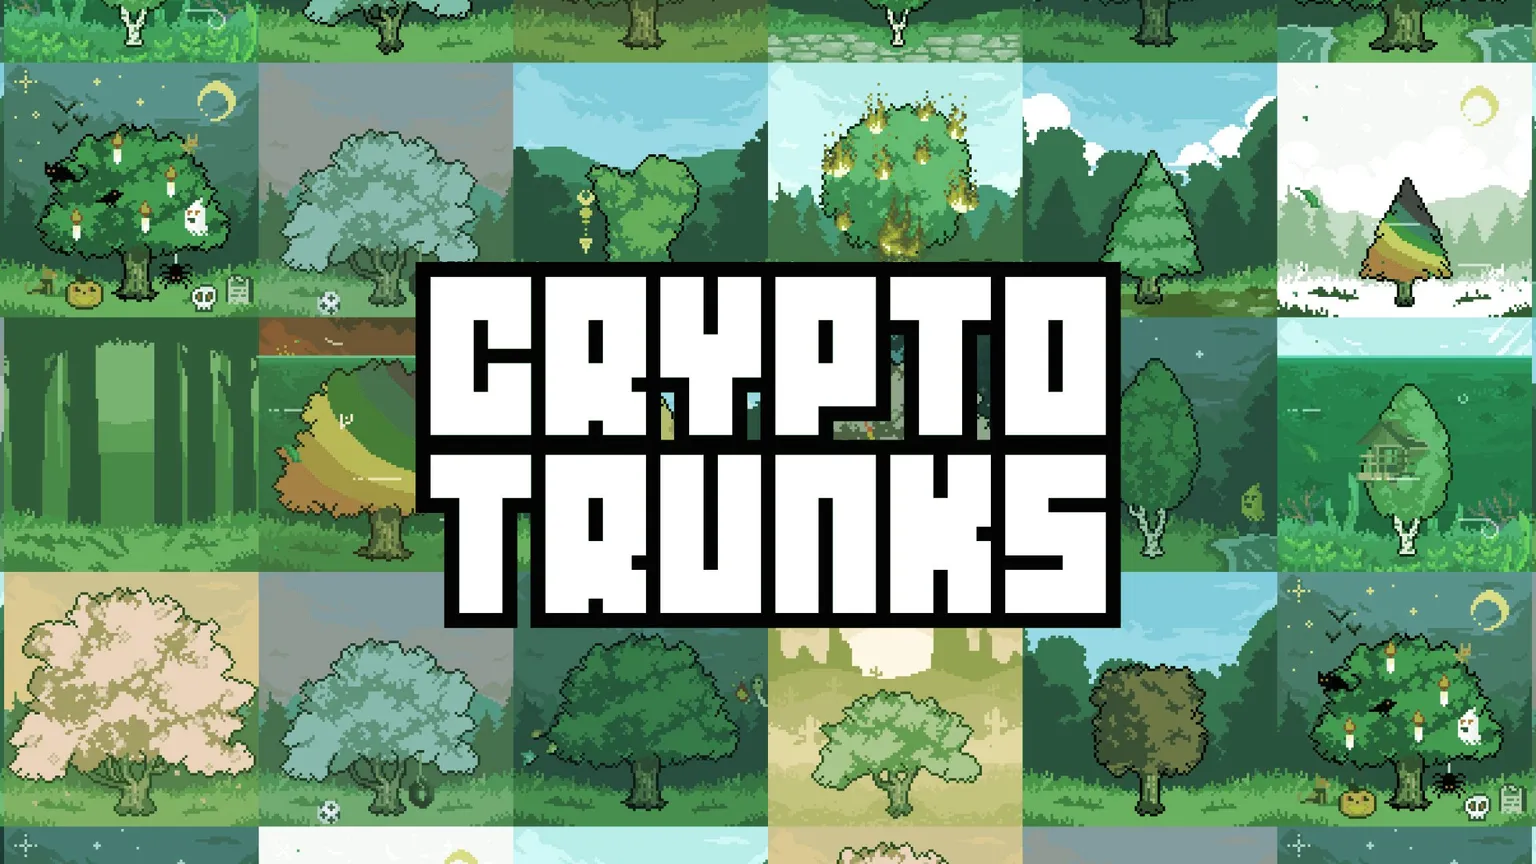 CryptoTrunks: the more you've hurt the planet—the bigger your trunk! Image courtesy of CryptoTrunks